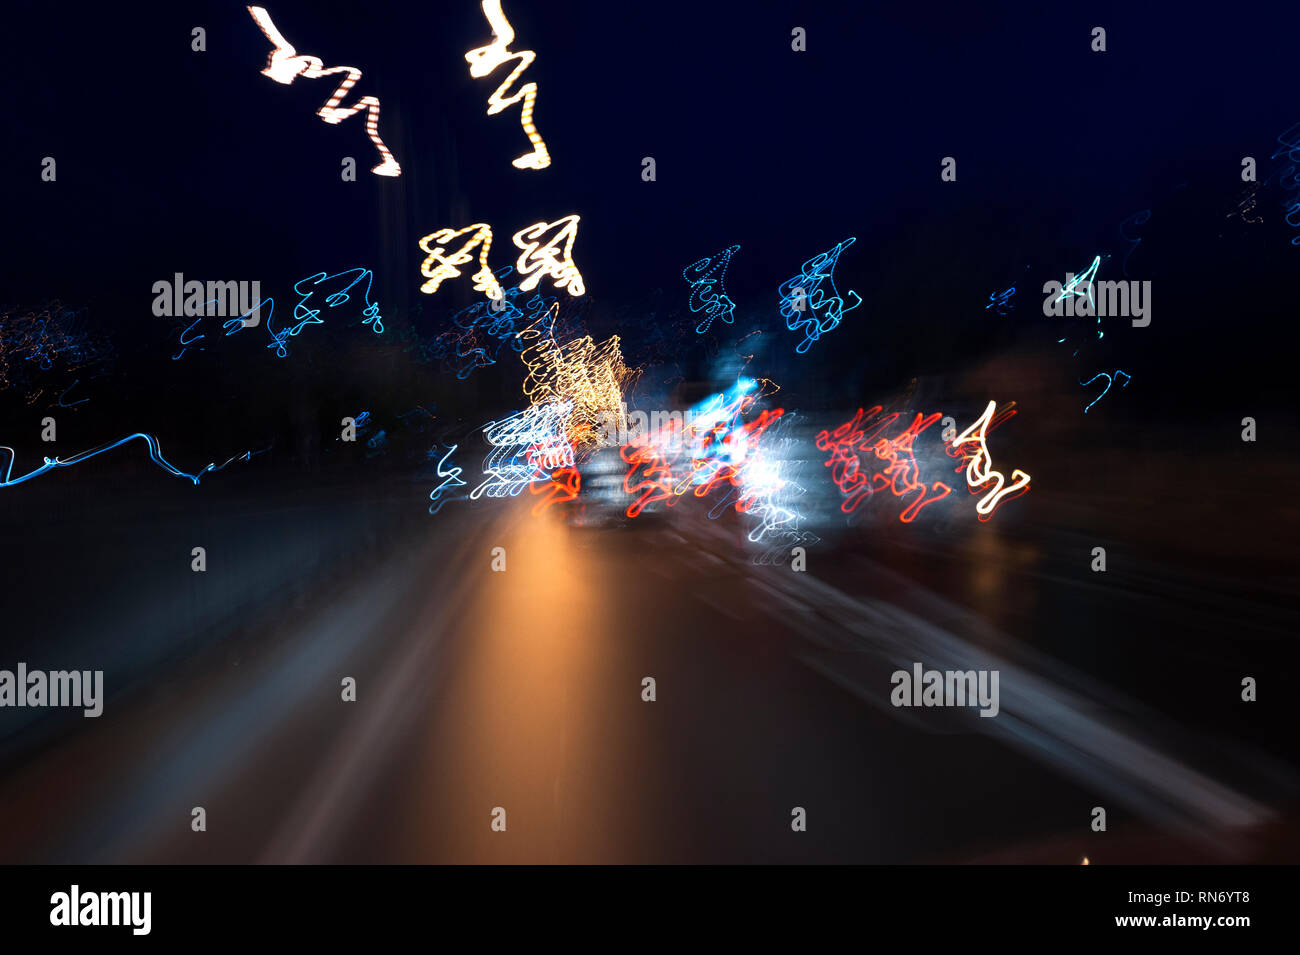 Looks like a view from eyes of a drunken driver, long exposure road photo at night abstract speeding background with cars. Stock Photo